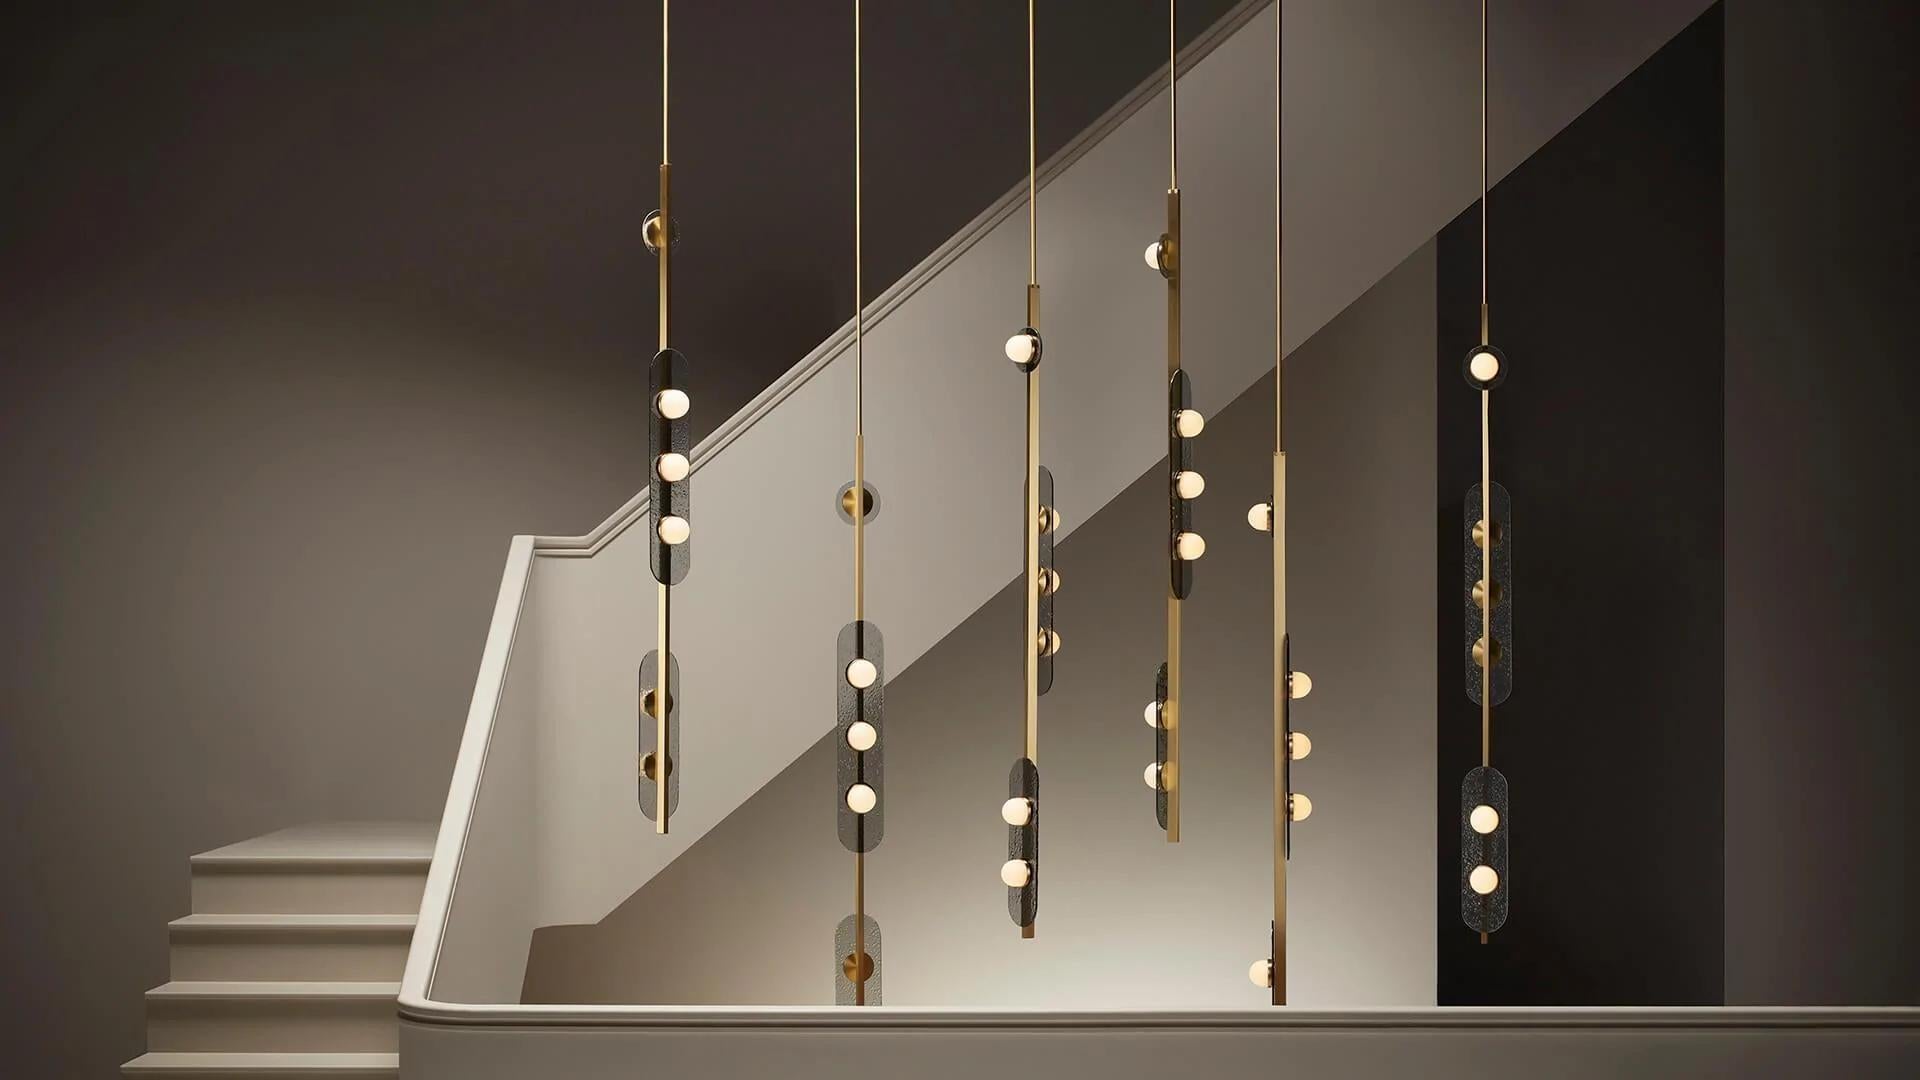 Modulo vertical pendant by CTO Lighting
Materials: Satin brass with smoked kiln cast glass and opal glass shades.
Also available in bronze with smoked kiln cast glass and opal glass shades.
Dimensions: W 12 x D 16 x H 180 cm

All our lamps can